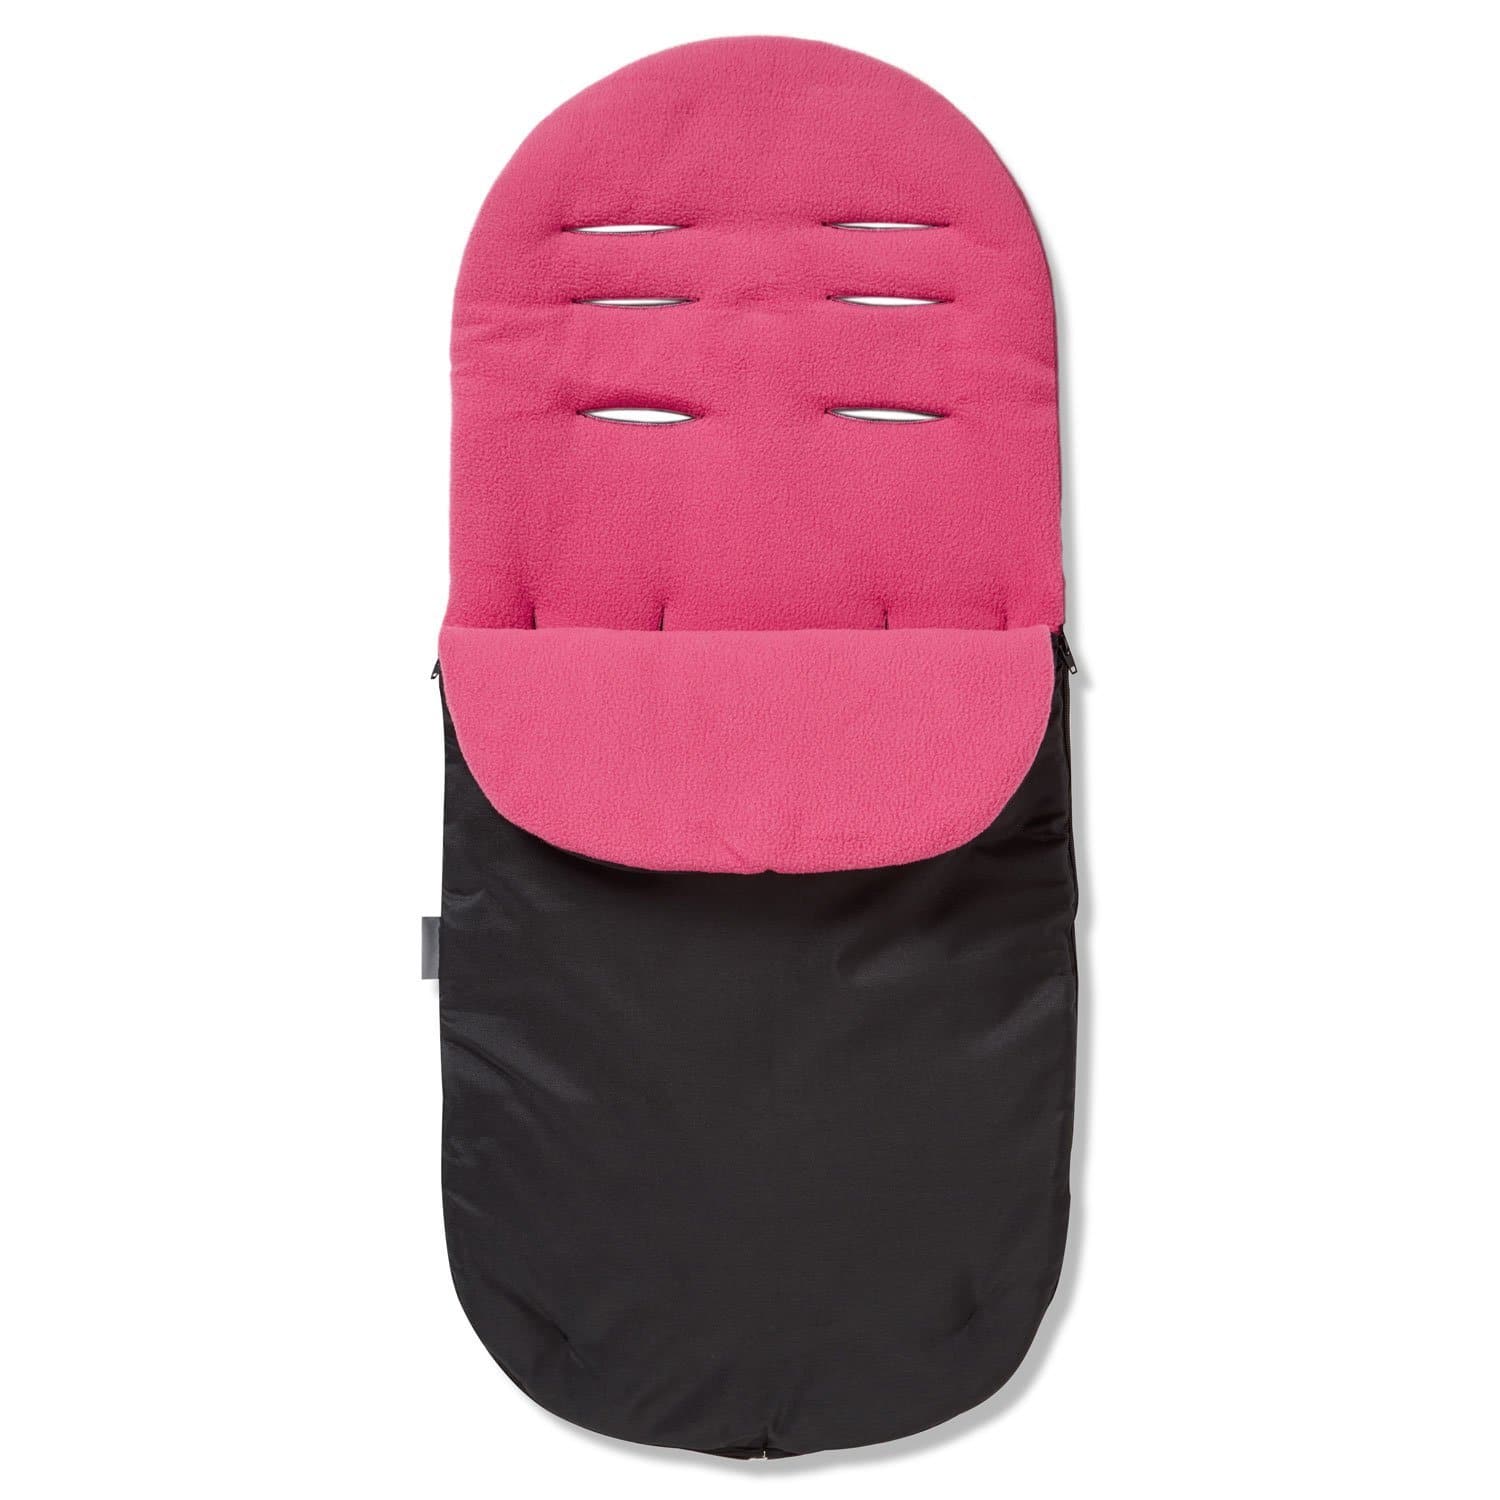 Footmuff / Cosy Toes Compatible with Diono - Dark Pink / Fits All Models | For Your Little One